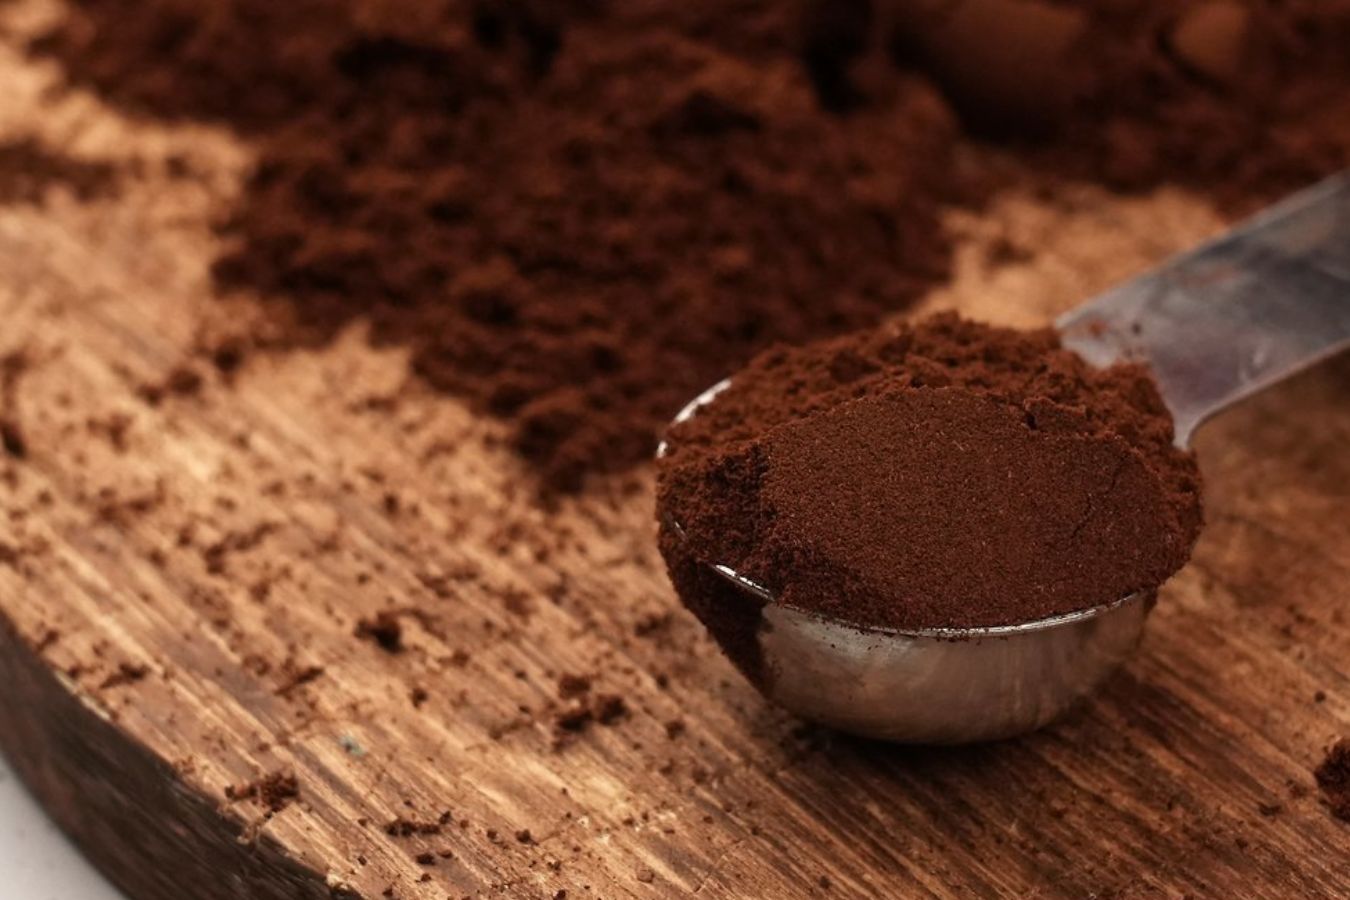 How To Grind Coffee Beans Without A Coffee Grinder